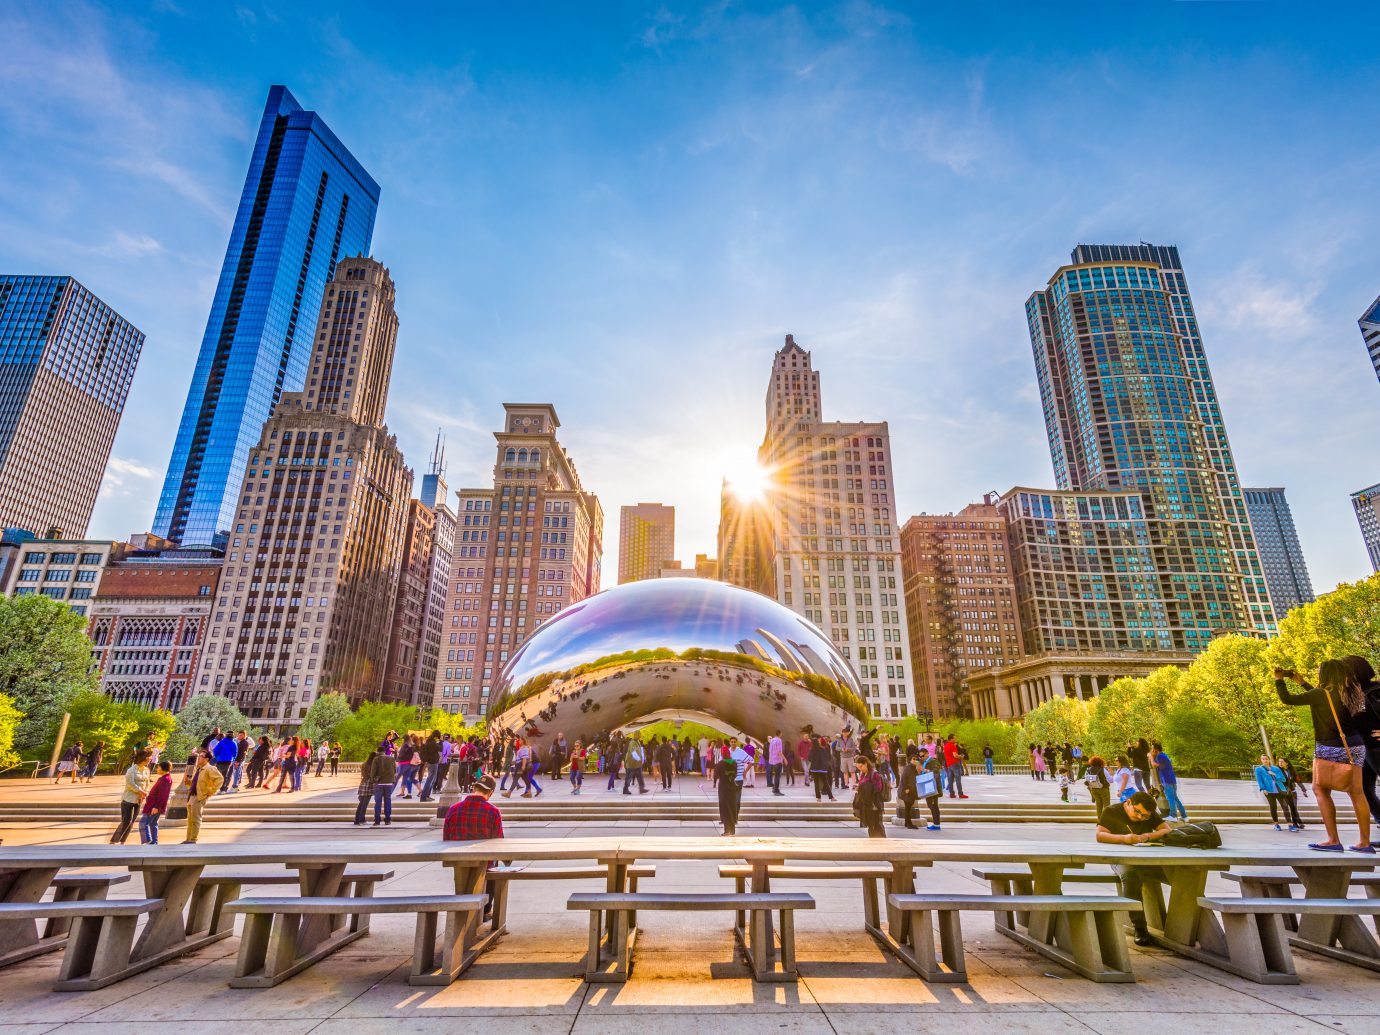 CHICAGO - ILLINOIS: MAY 9, 2018: Tourists visit Cloud Gate in Millennium Park in the late afternoon.